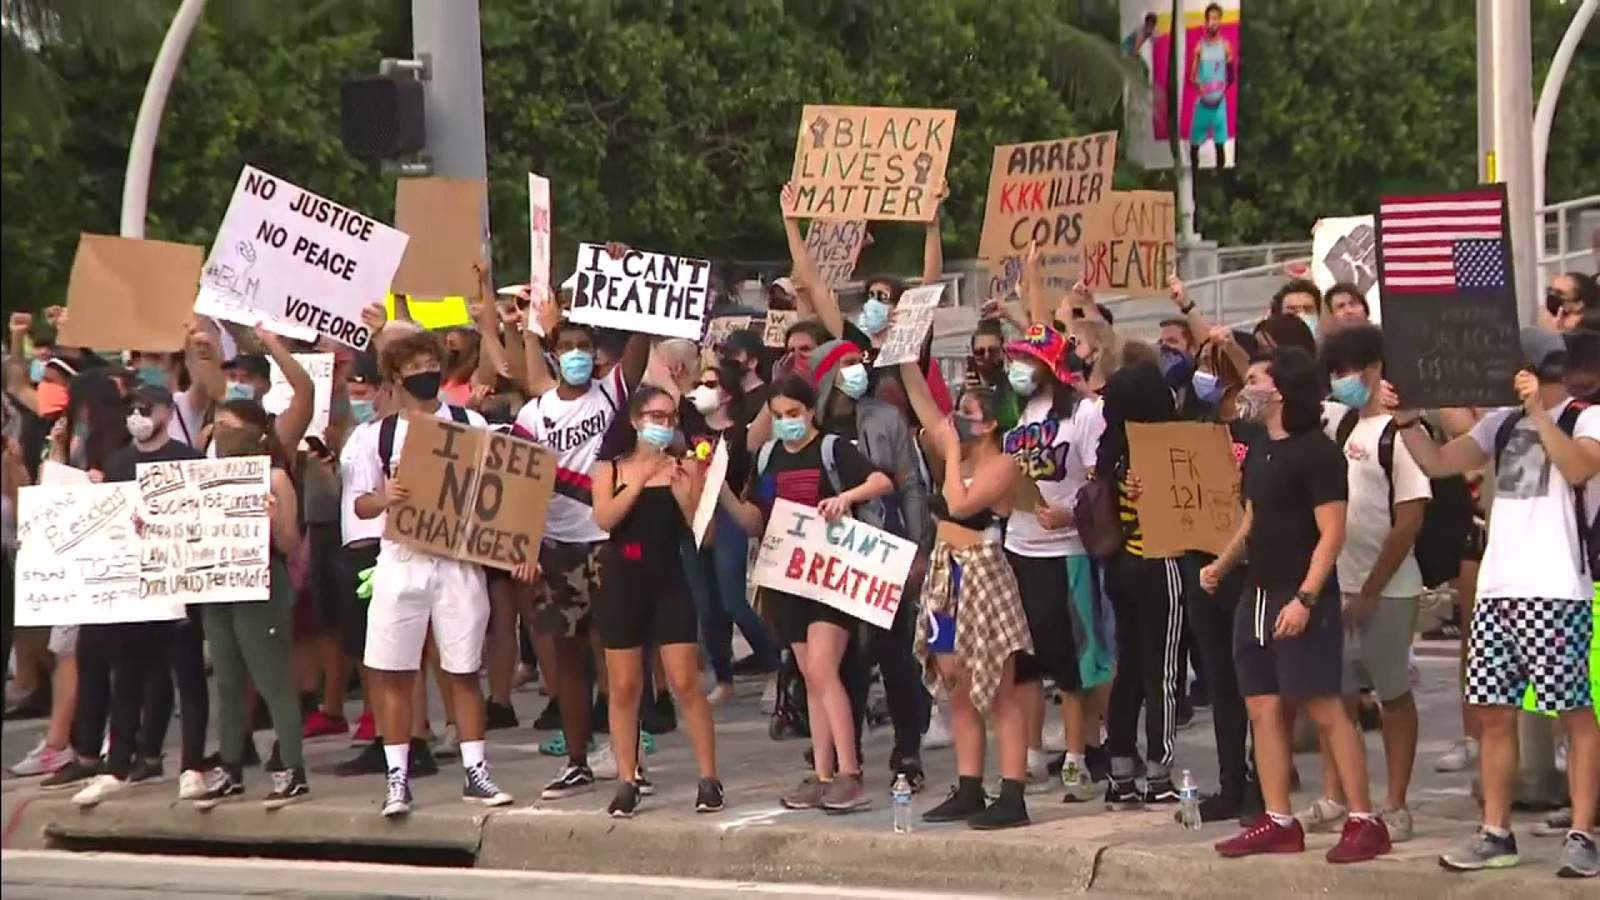 Protest against police brutality continued in downtown Miami, ended peacefully